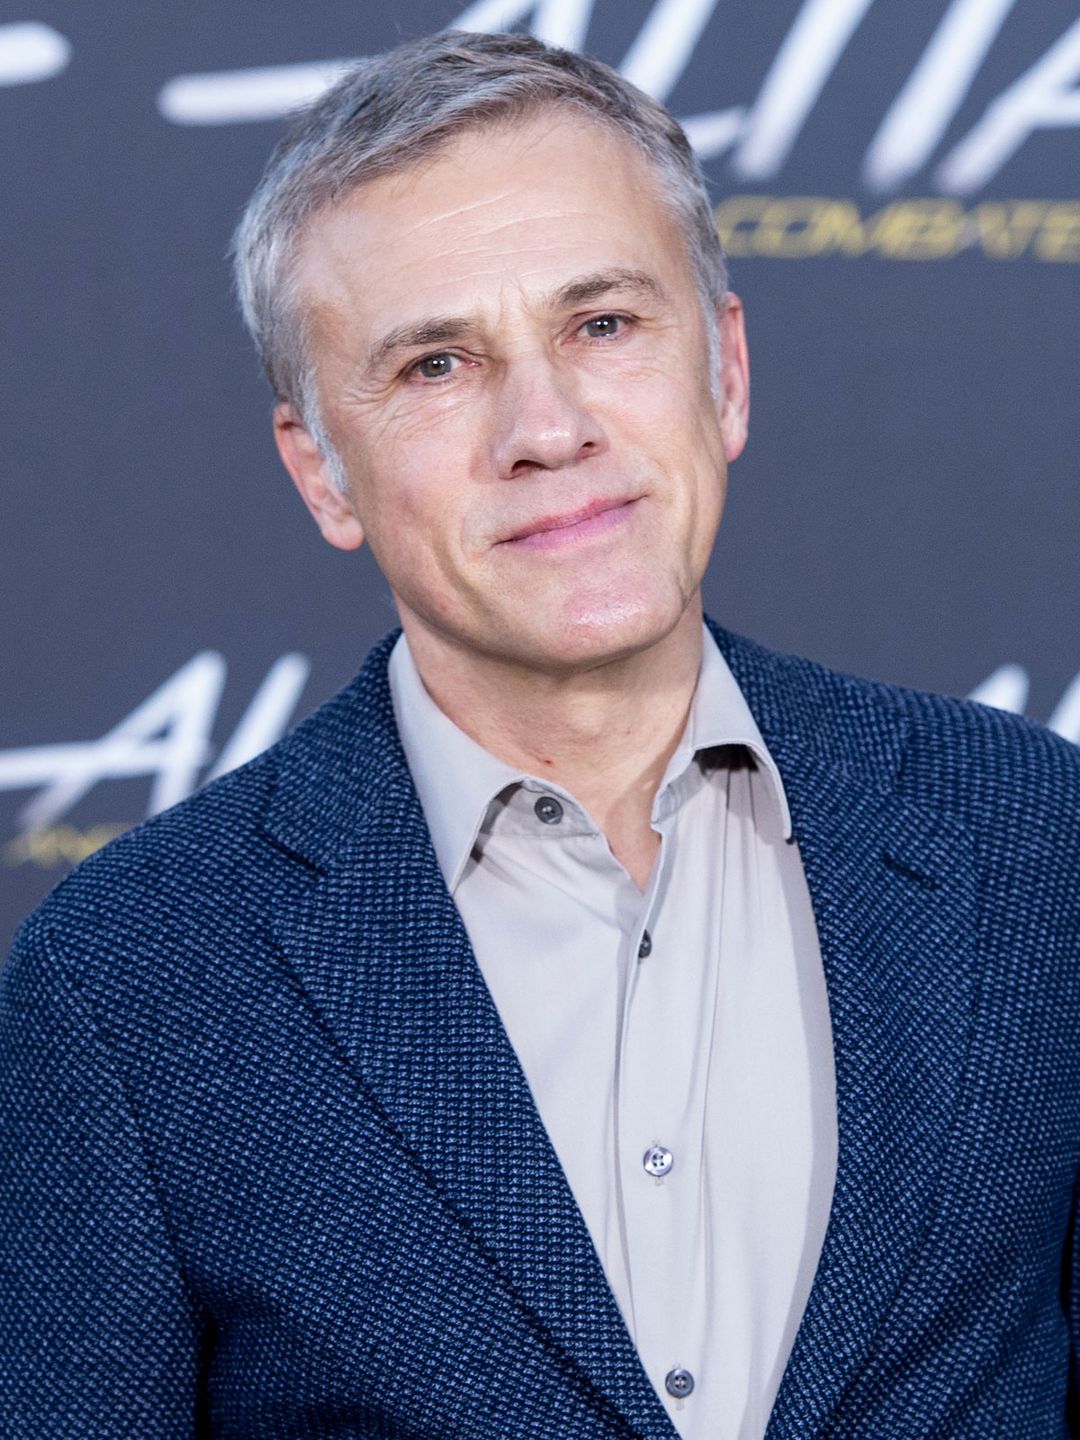 Christoph Waltz who are his parents